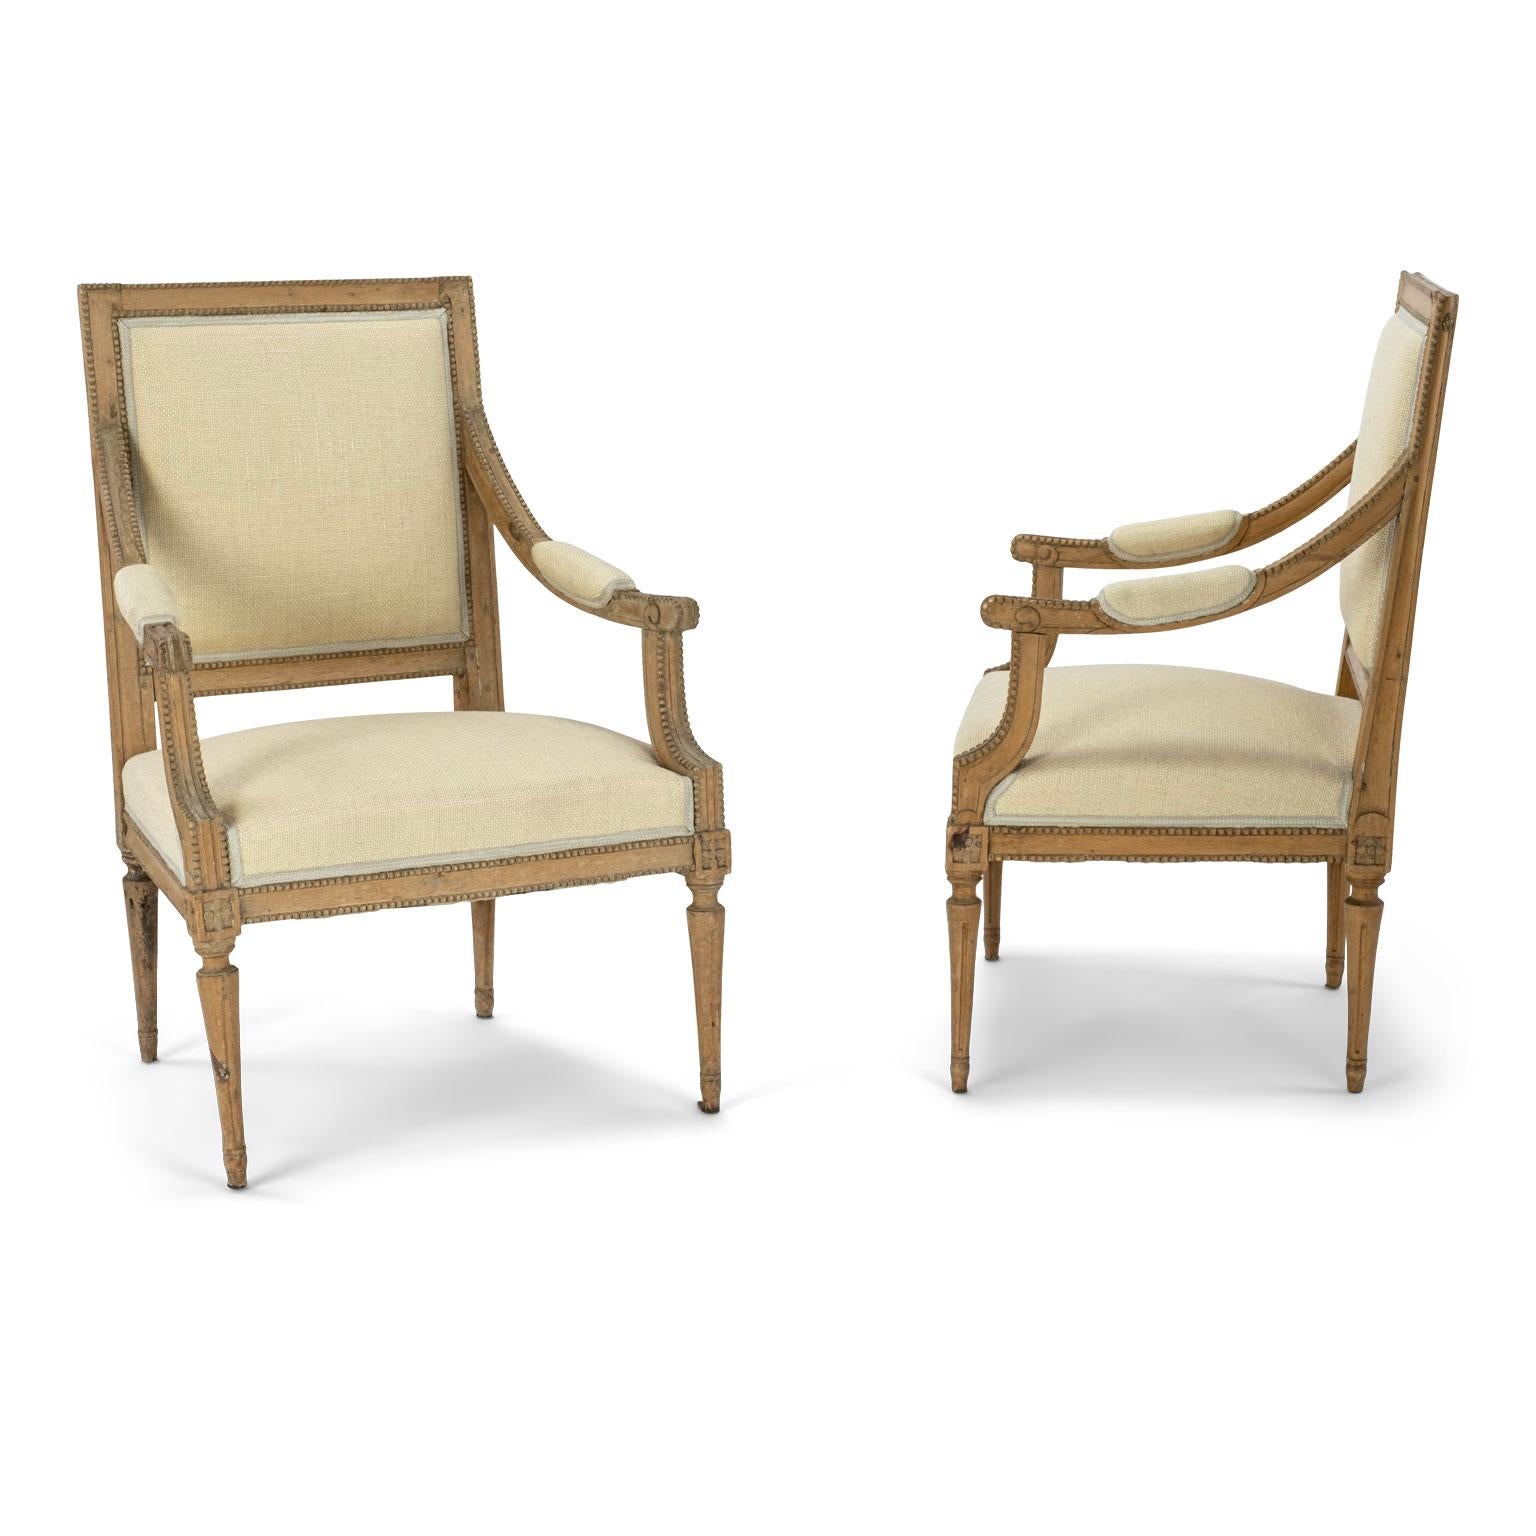 Pair of neoclassical Swedish armchairs constructed in beech circa 1840-1860. Upholstered in pale yellow-cream color linen. Excellent hand-carved beaded details. Sold together and priced $7,900 for the pair.